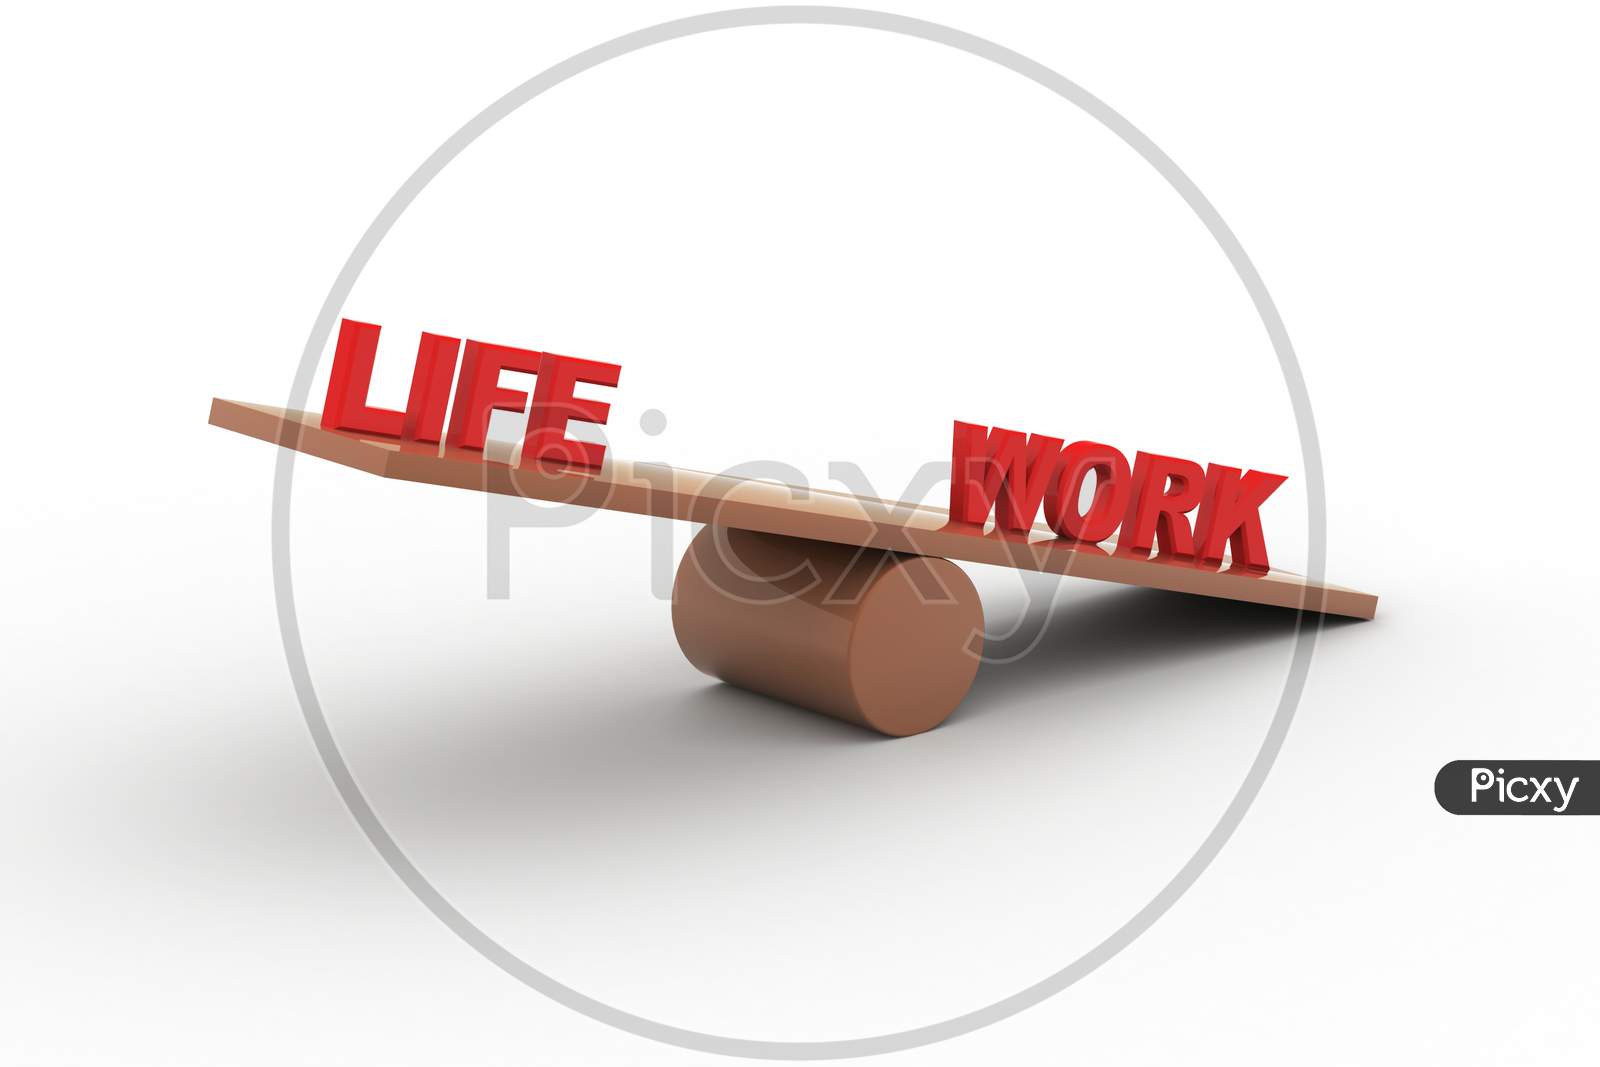 Concept of LIFE vs Work